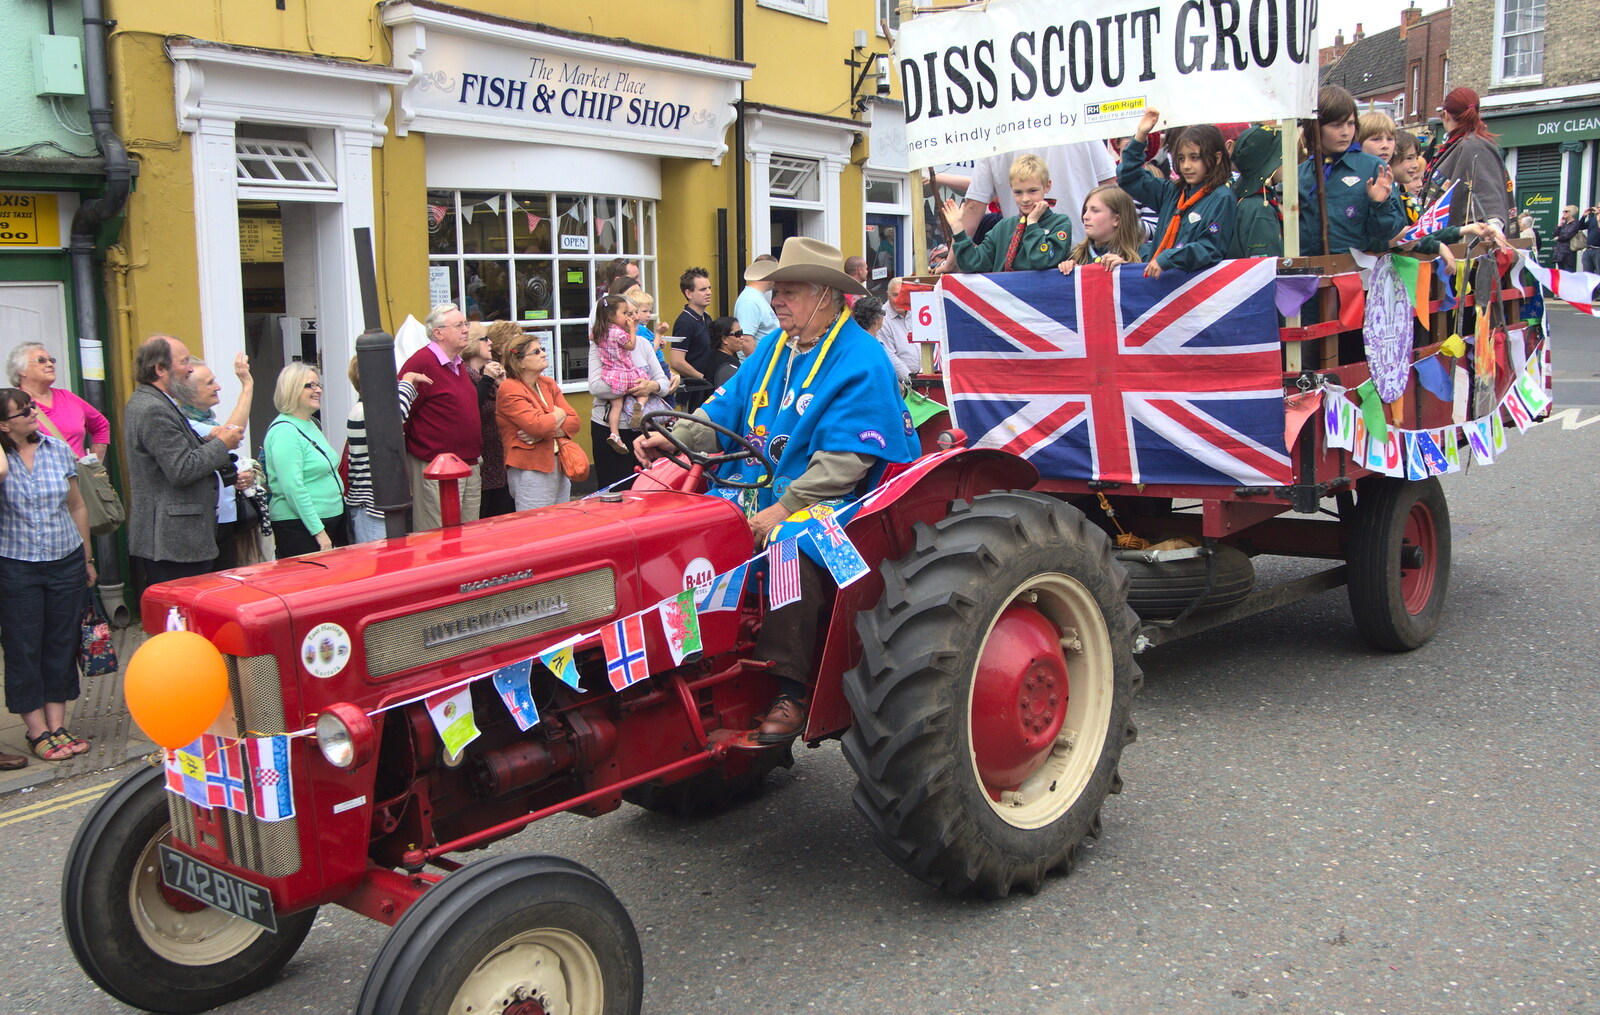 Diss Scout Group on an International tractor from Morris Dancing and a Carnival Procession, Diss, Norfolk - 17th June 2012